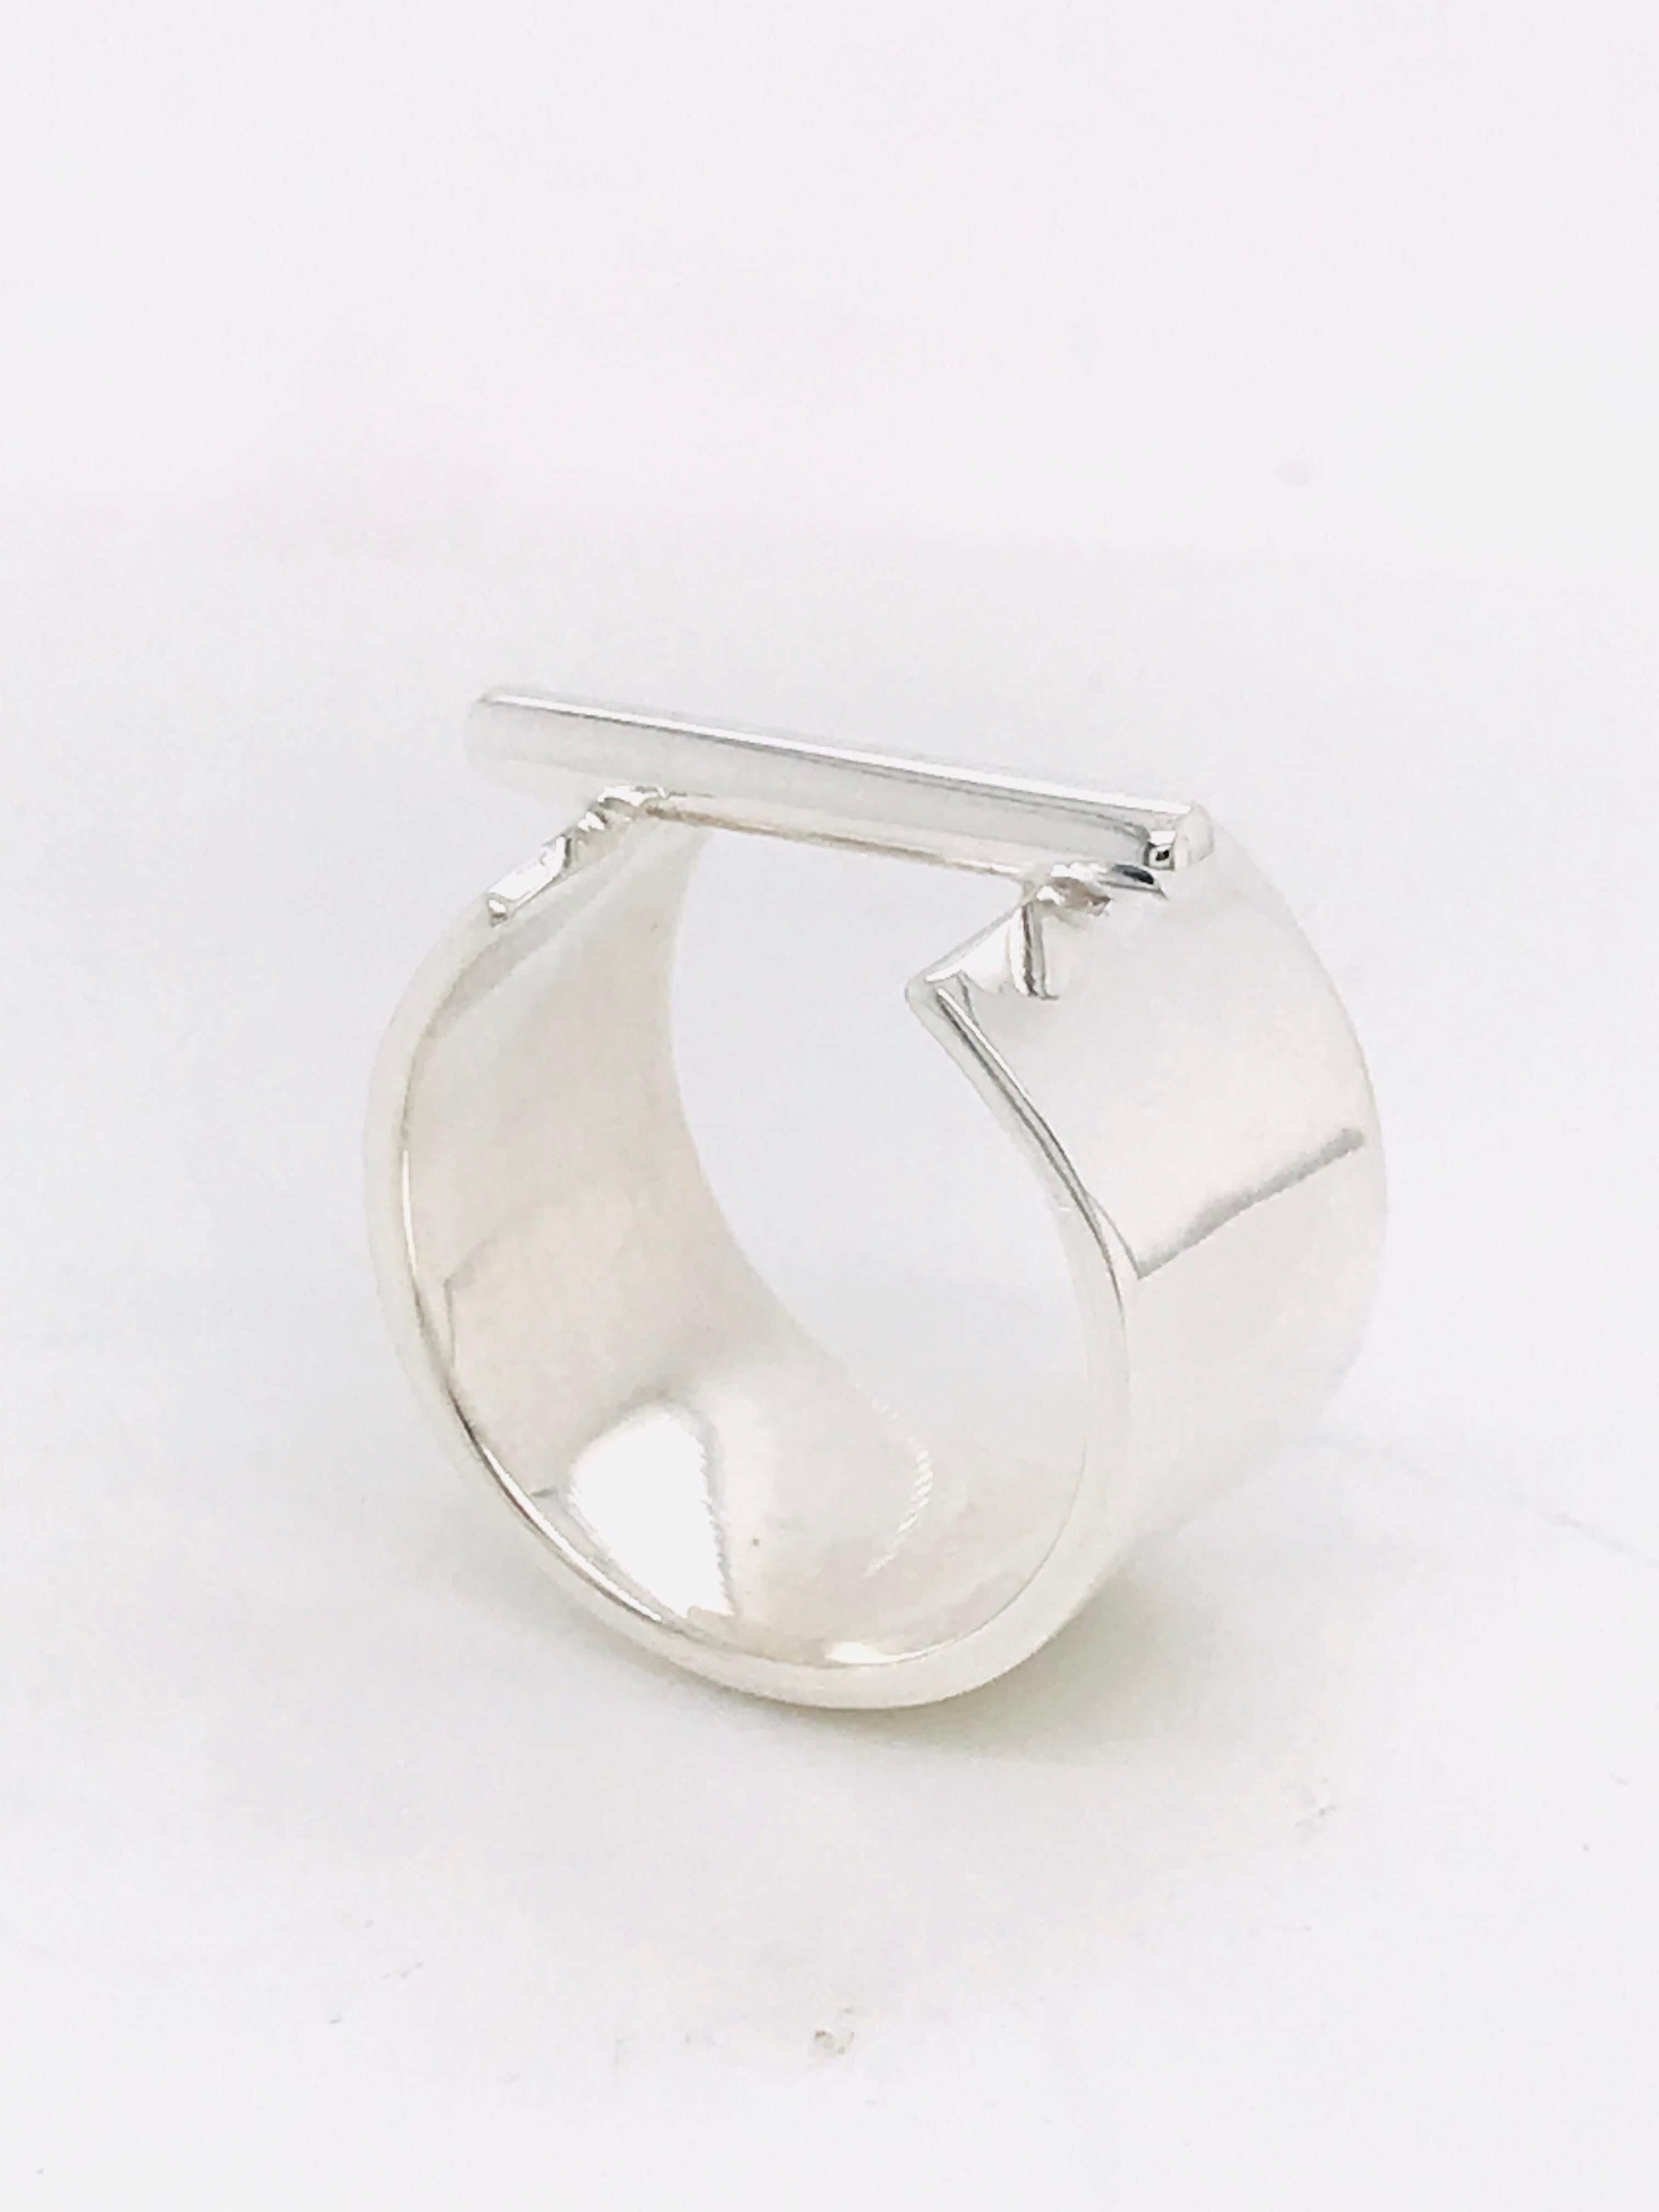 Contemporary Modern Silver Ring with Cross Bar